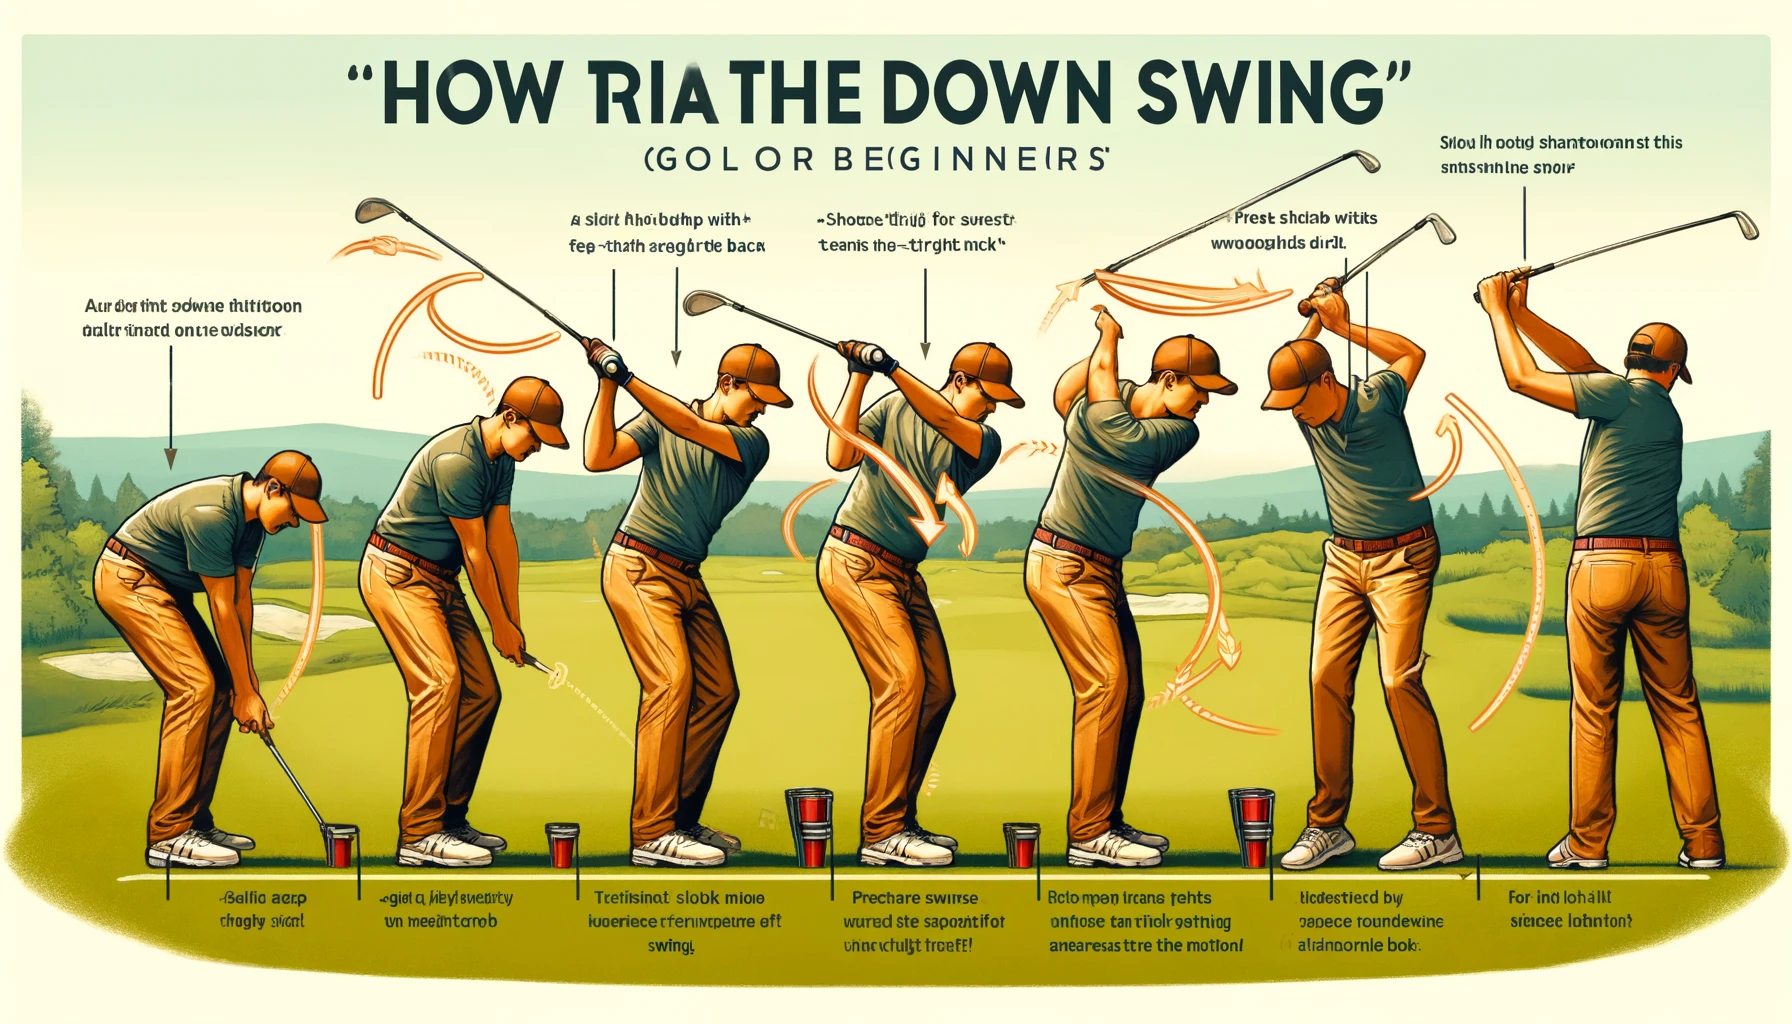 How To Train The Down Swing-Golf Tip For Beginners